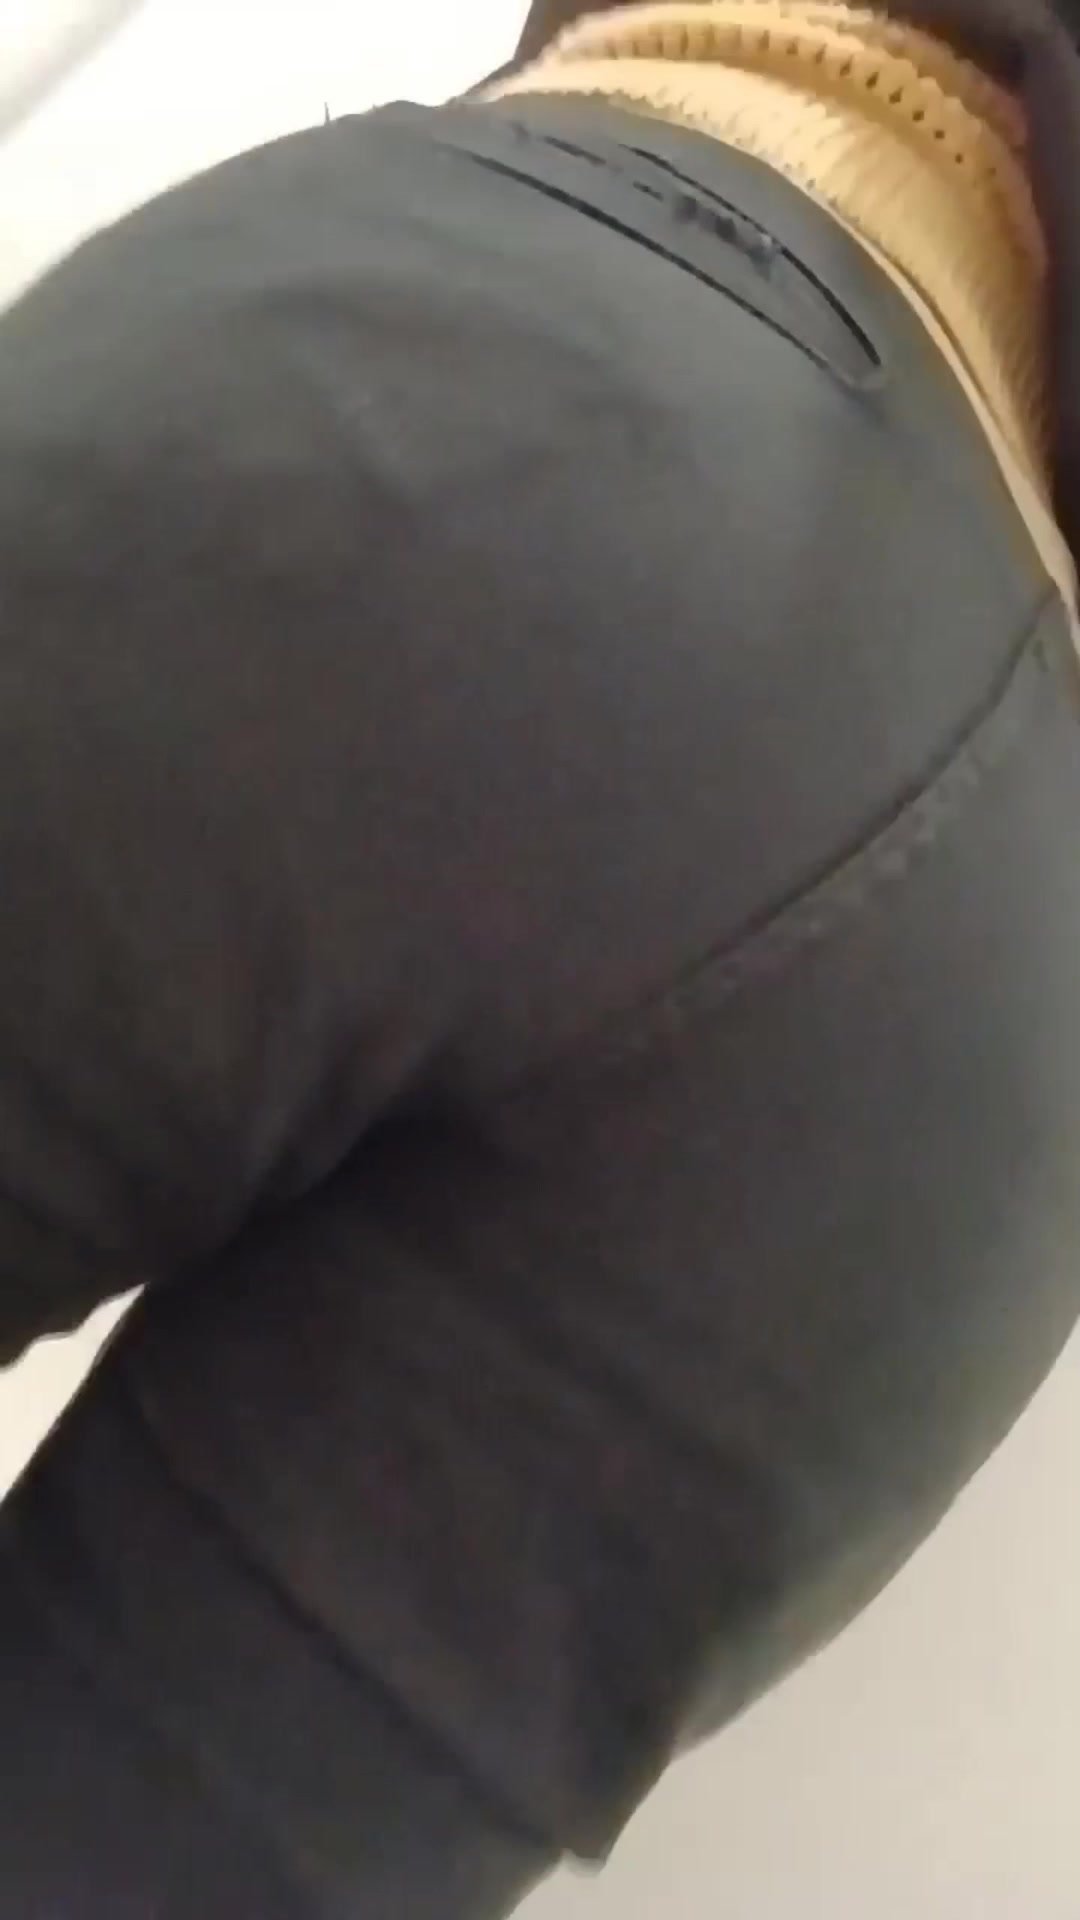 Farting at work - video 10